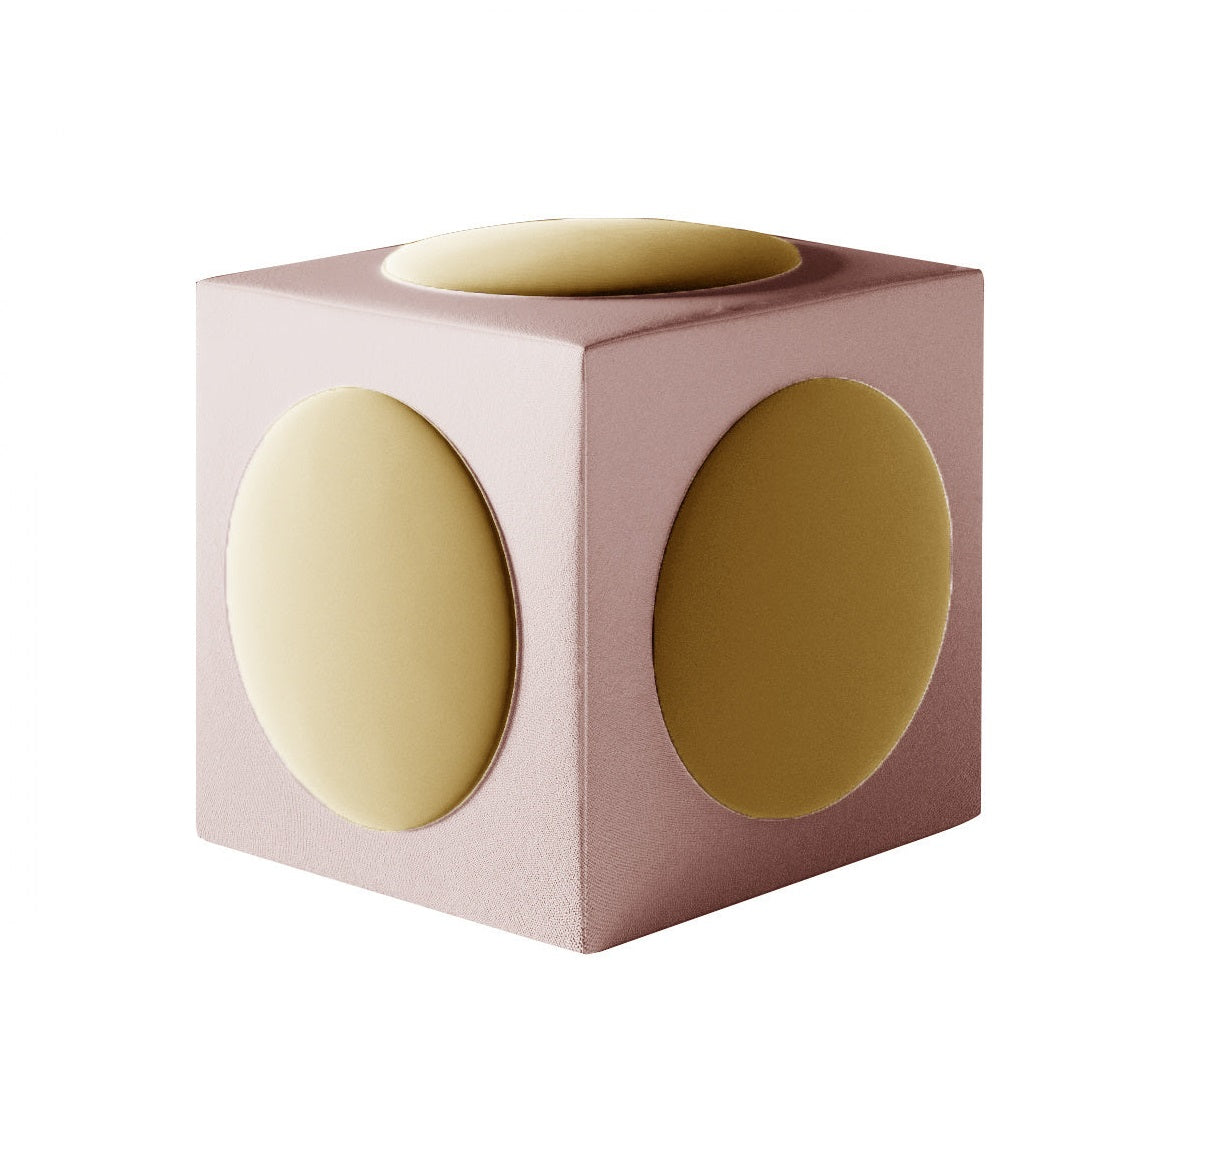 CACKO pouffe yellow with pink